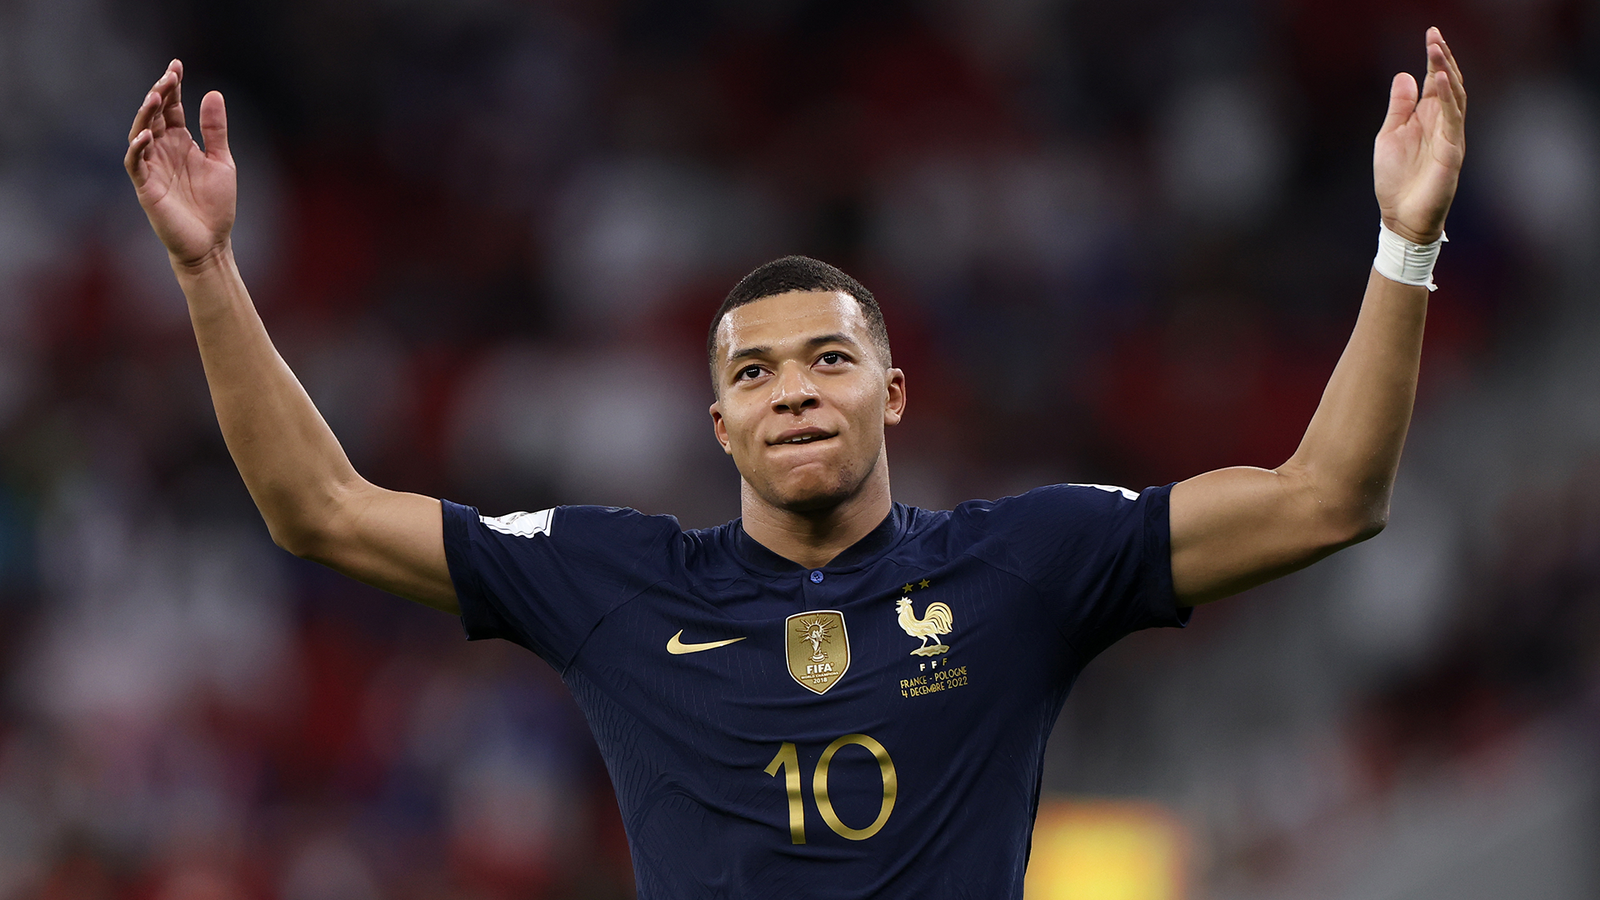 Kylian Mbappé works his magic for goals two and three in France vs. Poland